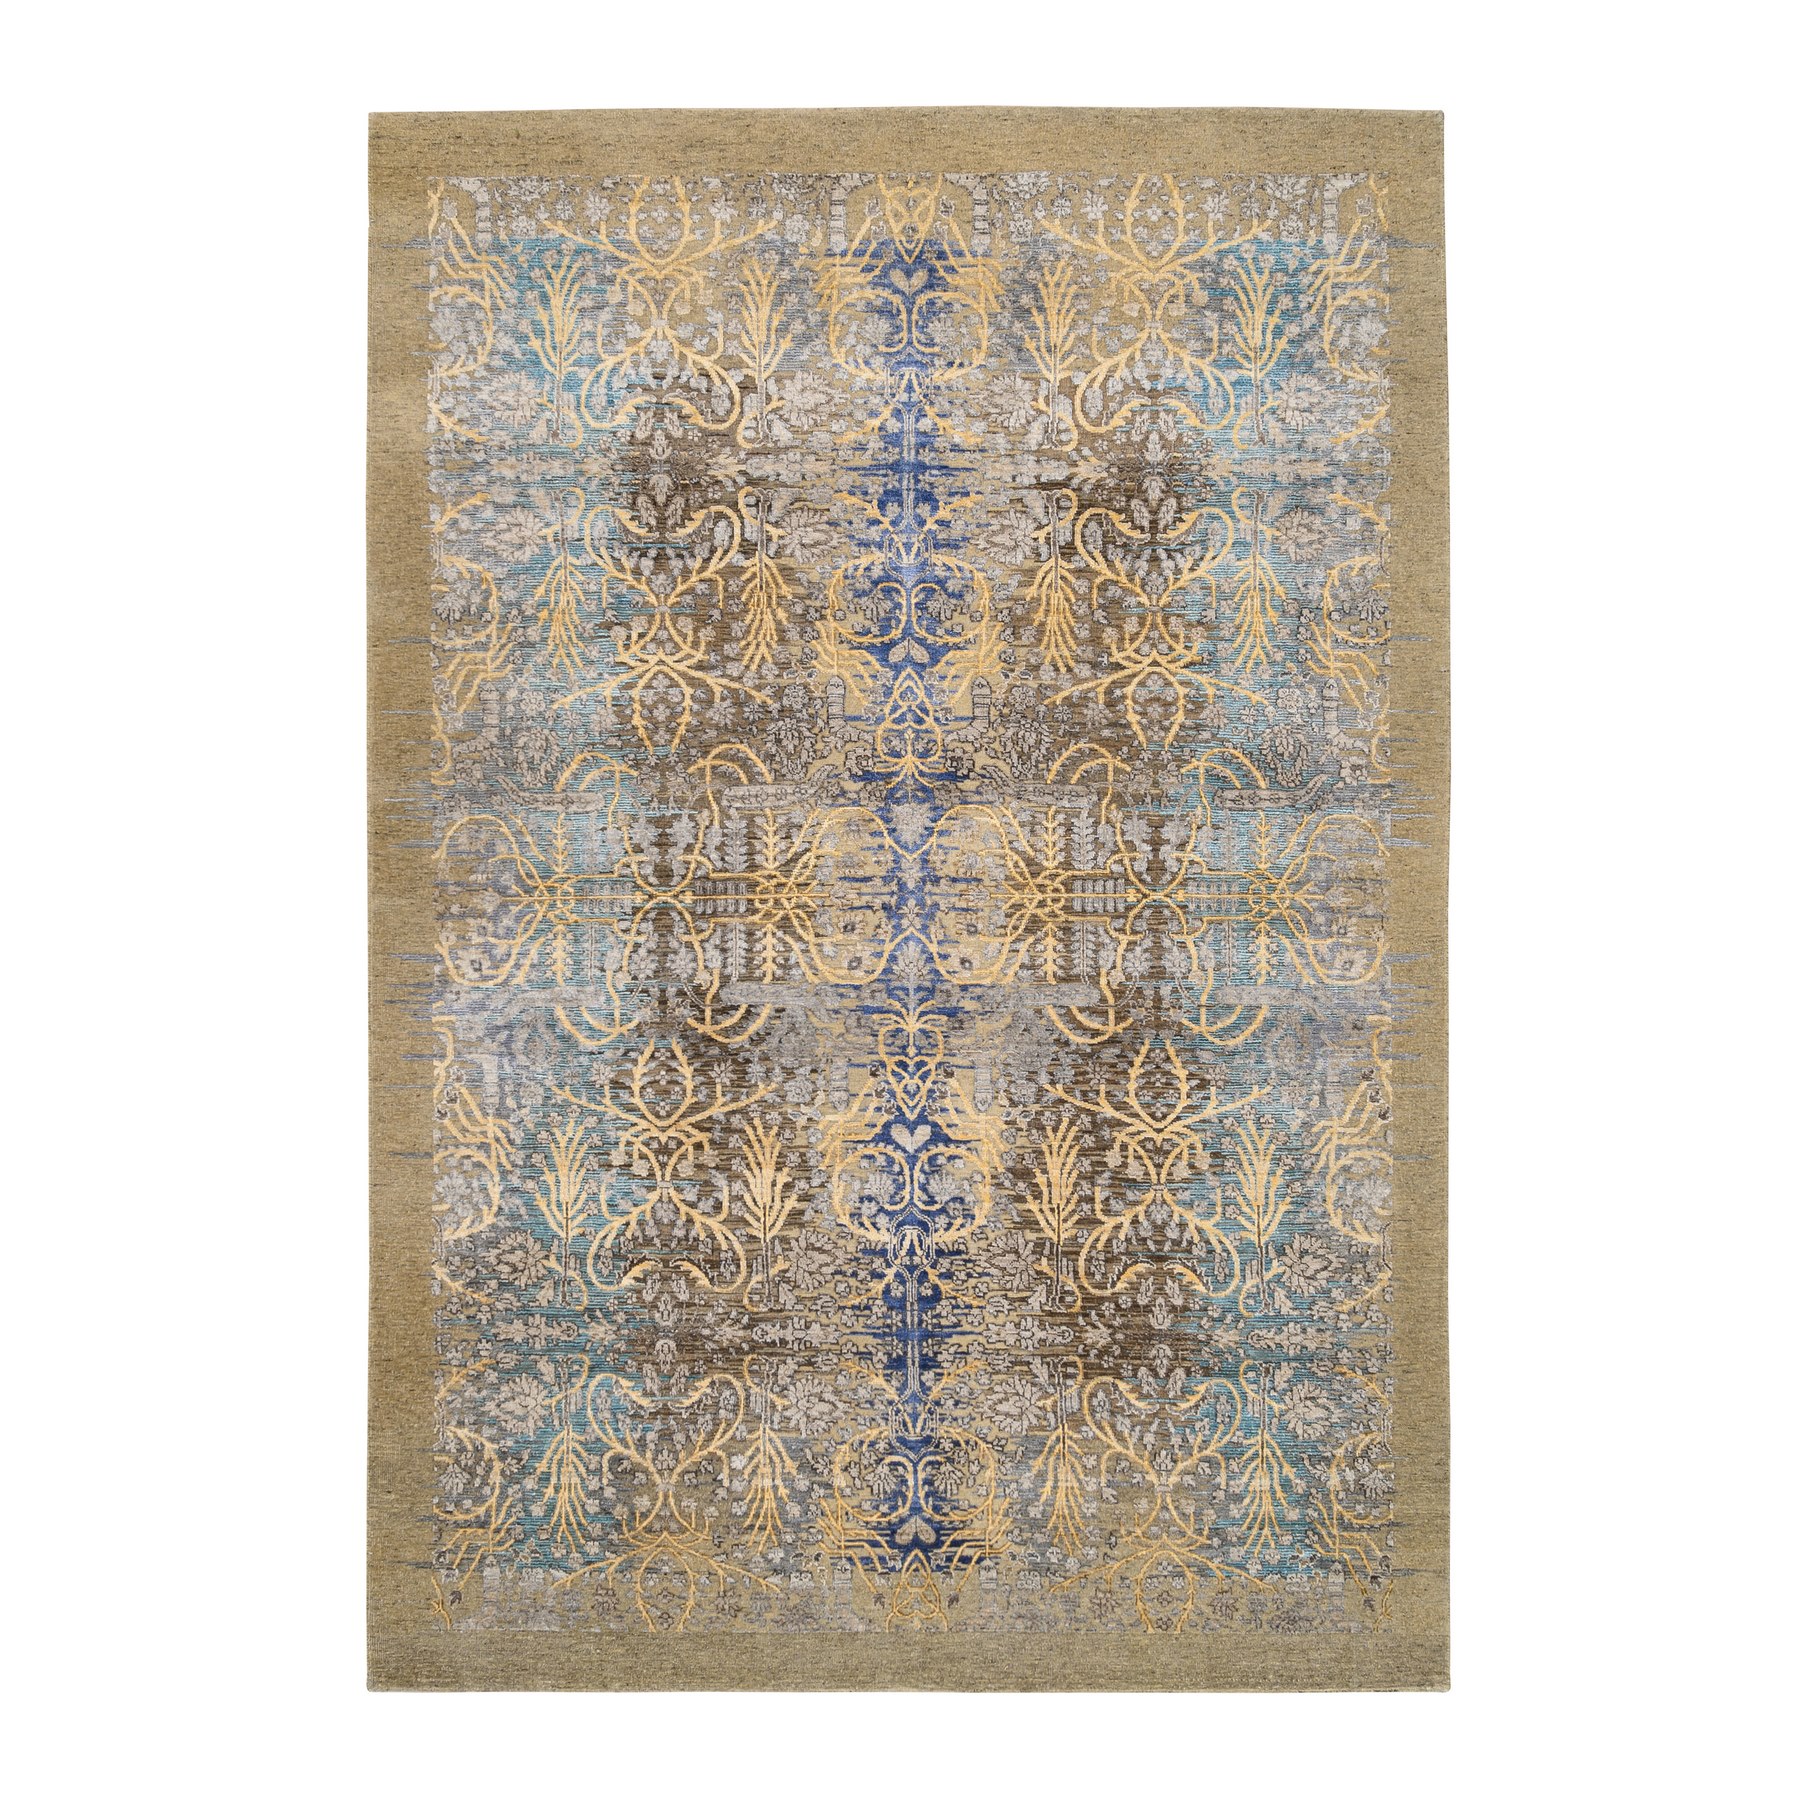 6'3"x9'2" Tan and Chocolate Brown, Transitional Sarouk Silk With Textured Wool Hand Woven Oriental Rug 